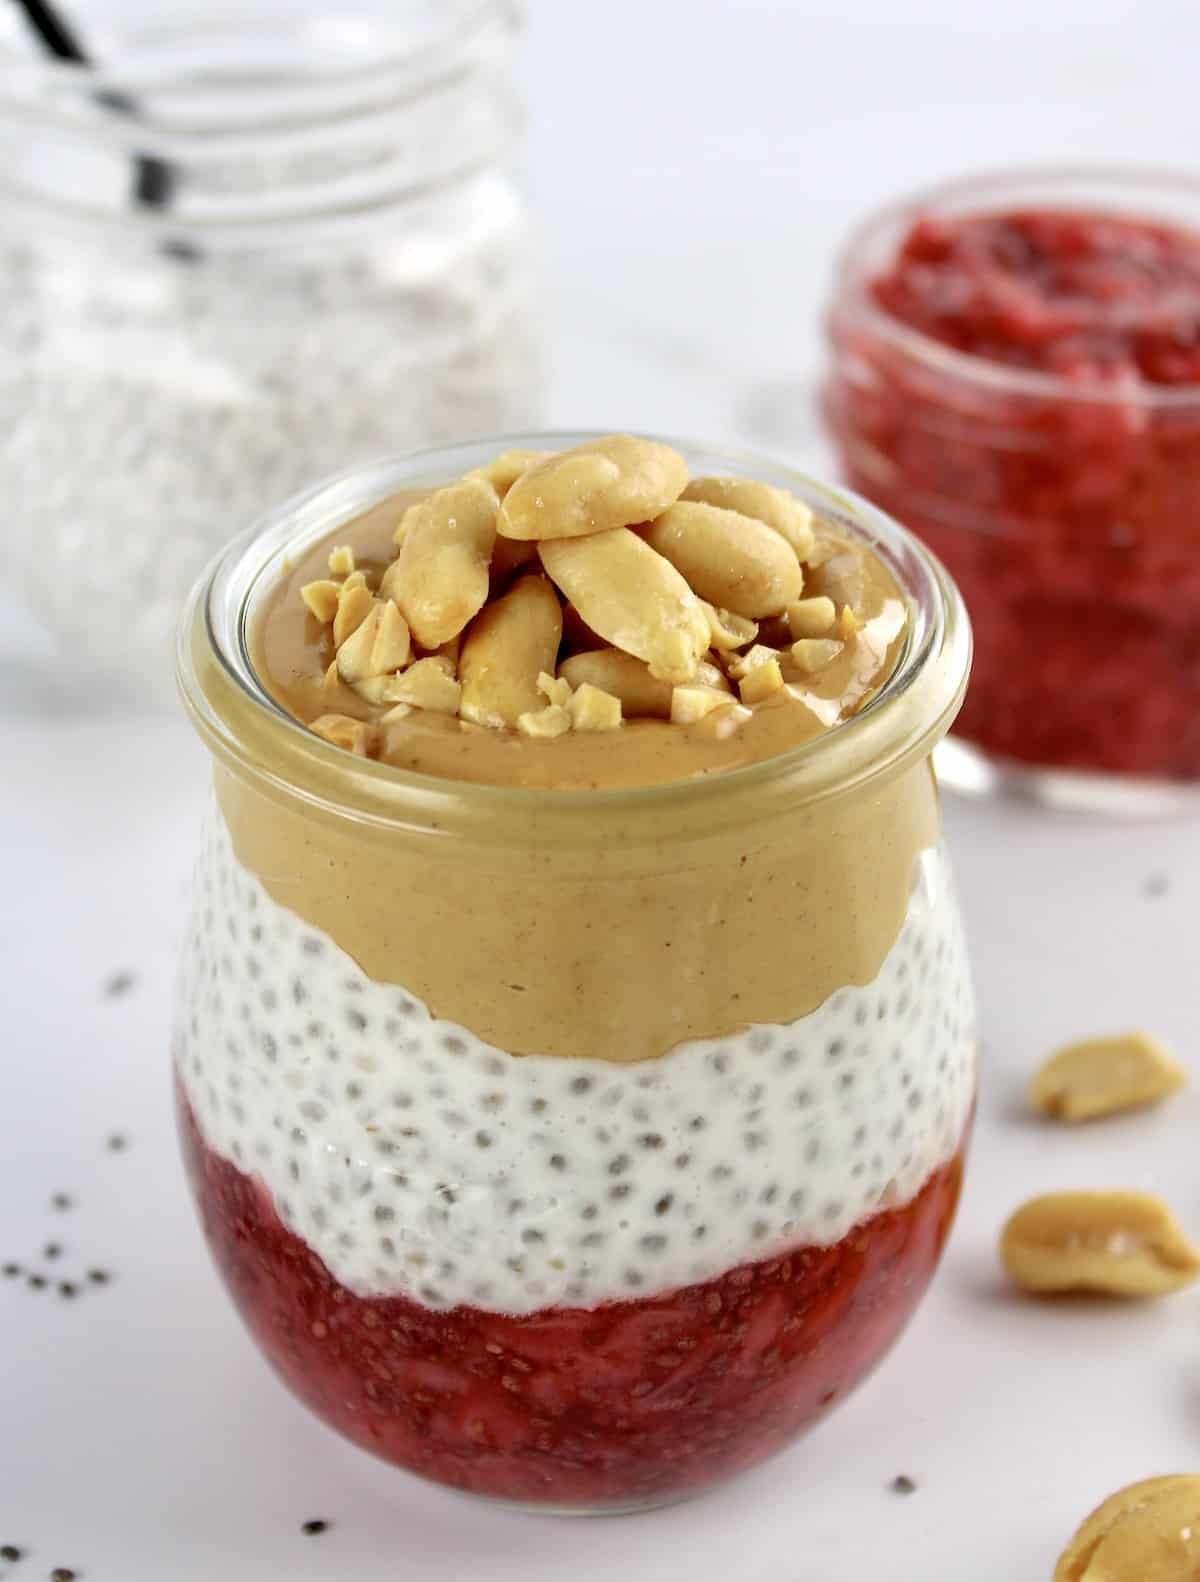 Peanut butter and Jelly Chia Pudding layered in glass jar with peanuts on top